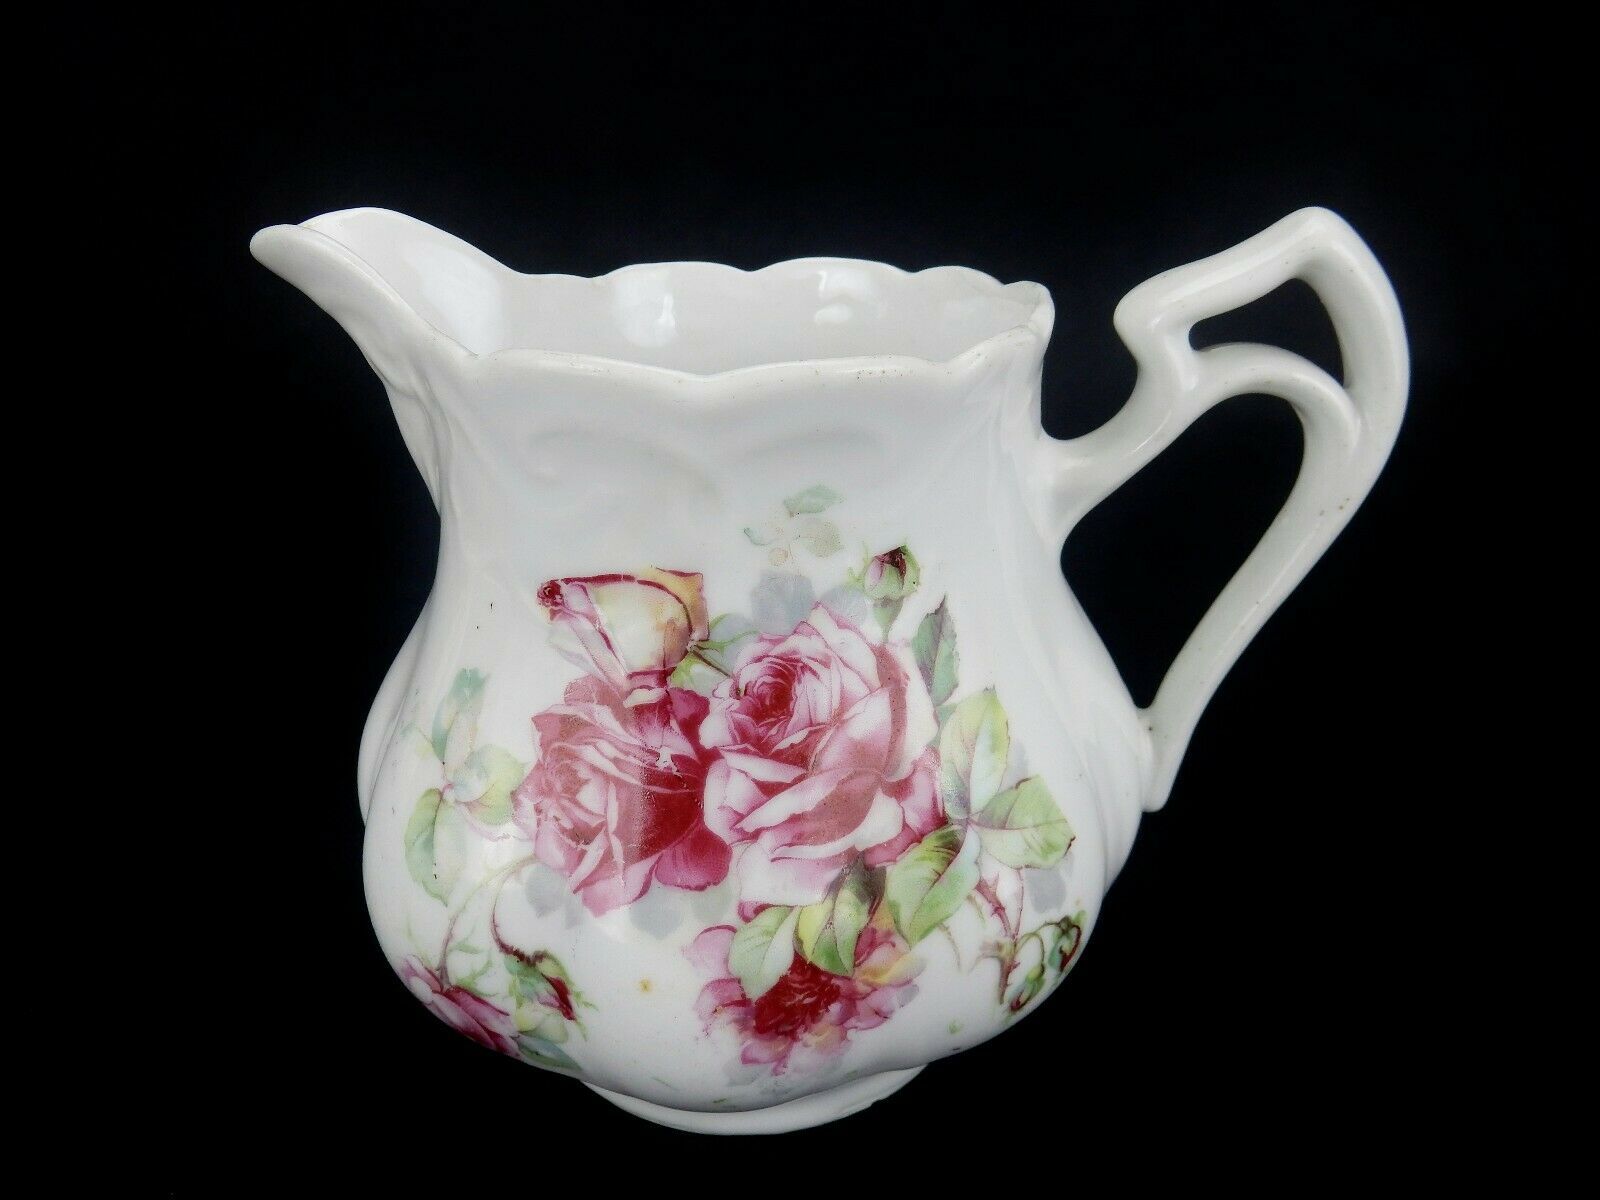 Primary image for Vintage Porcelain Pitcher w/ Rose Transfer Ware and Unique Double Loop Handle